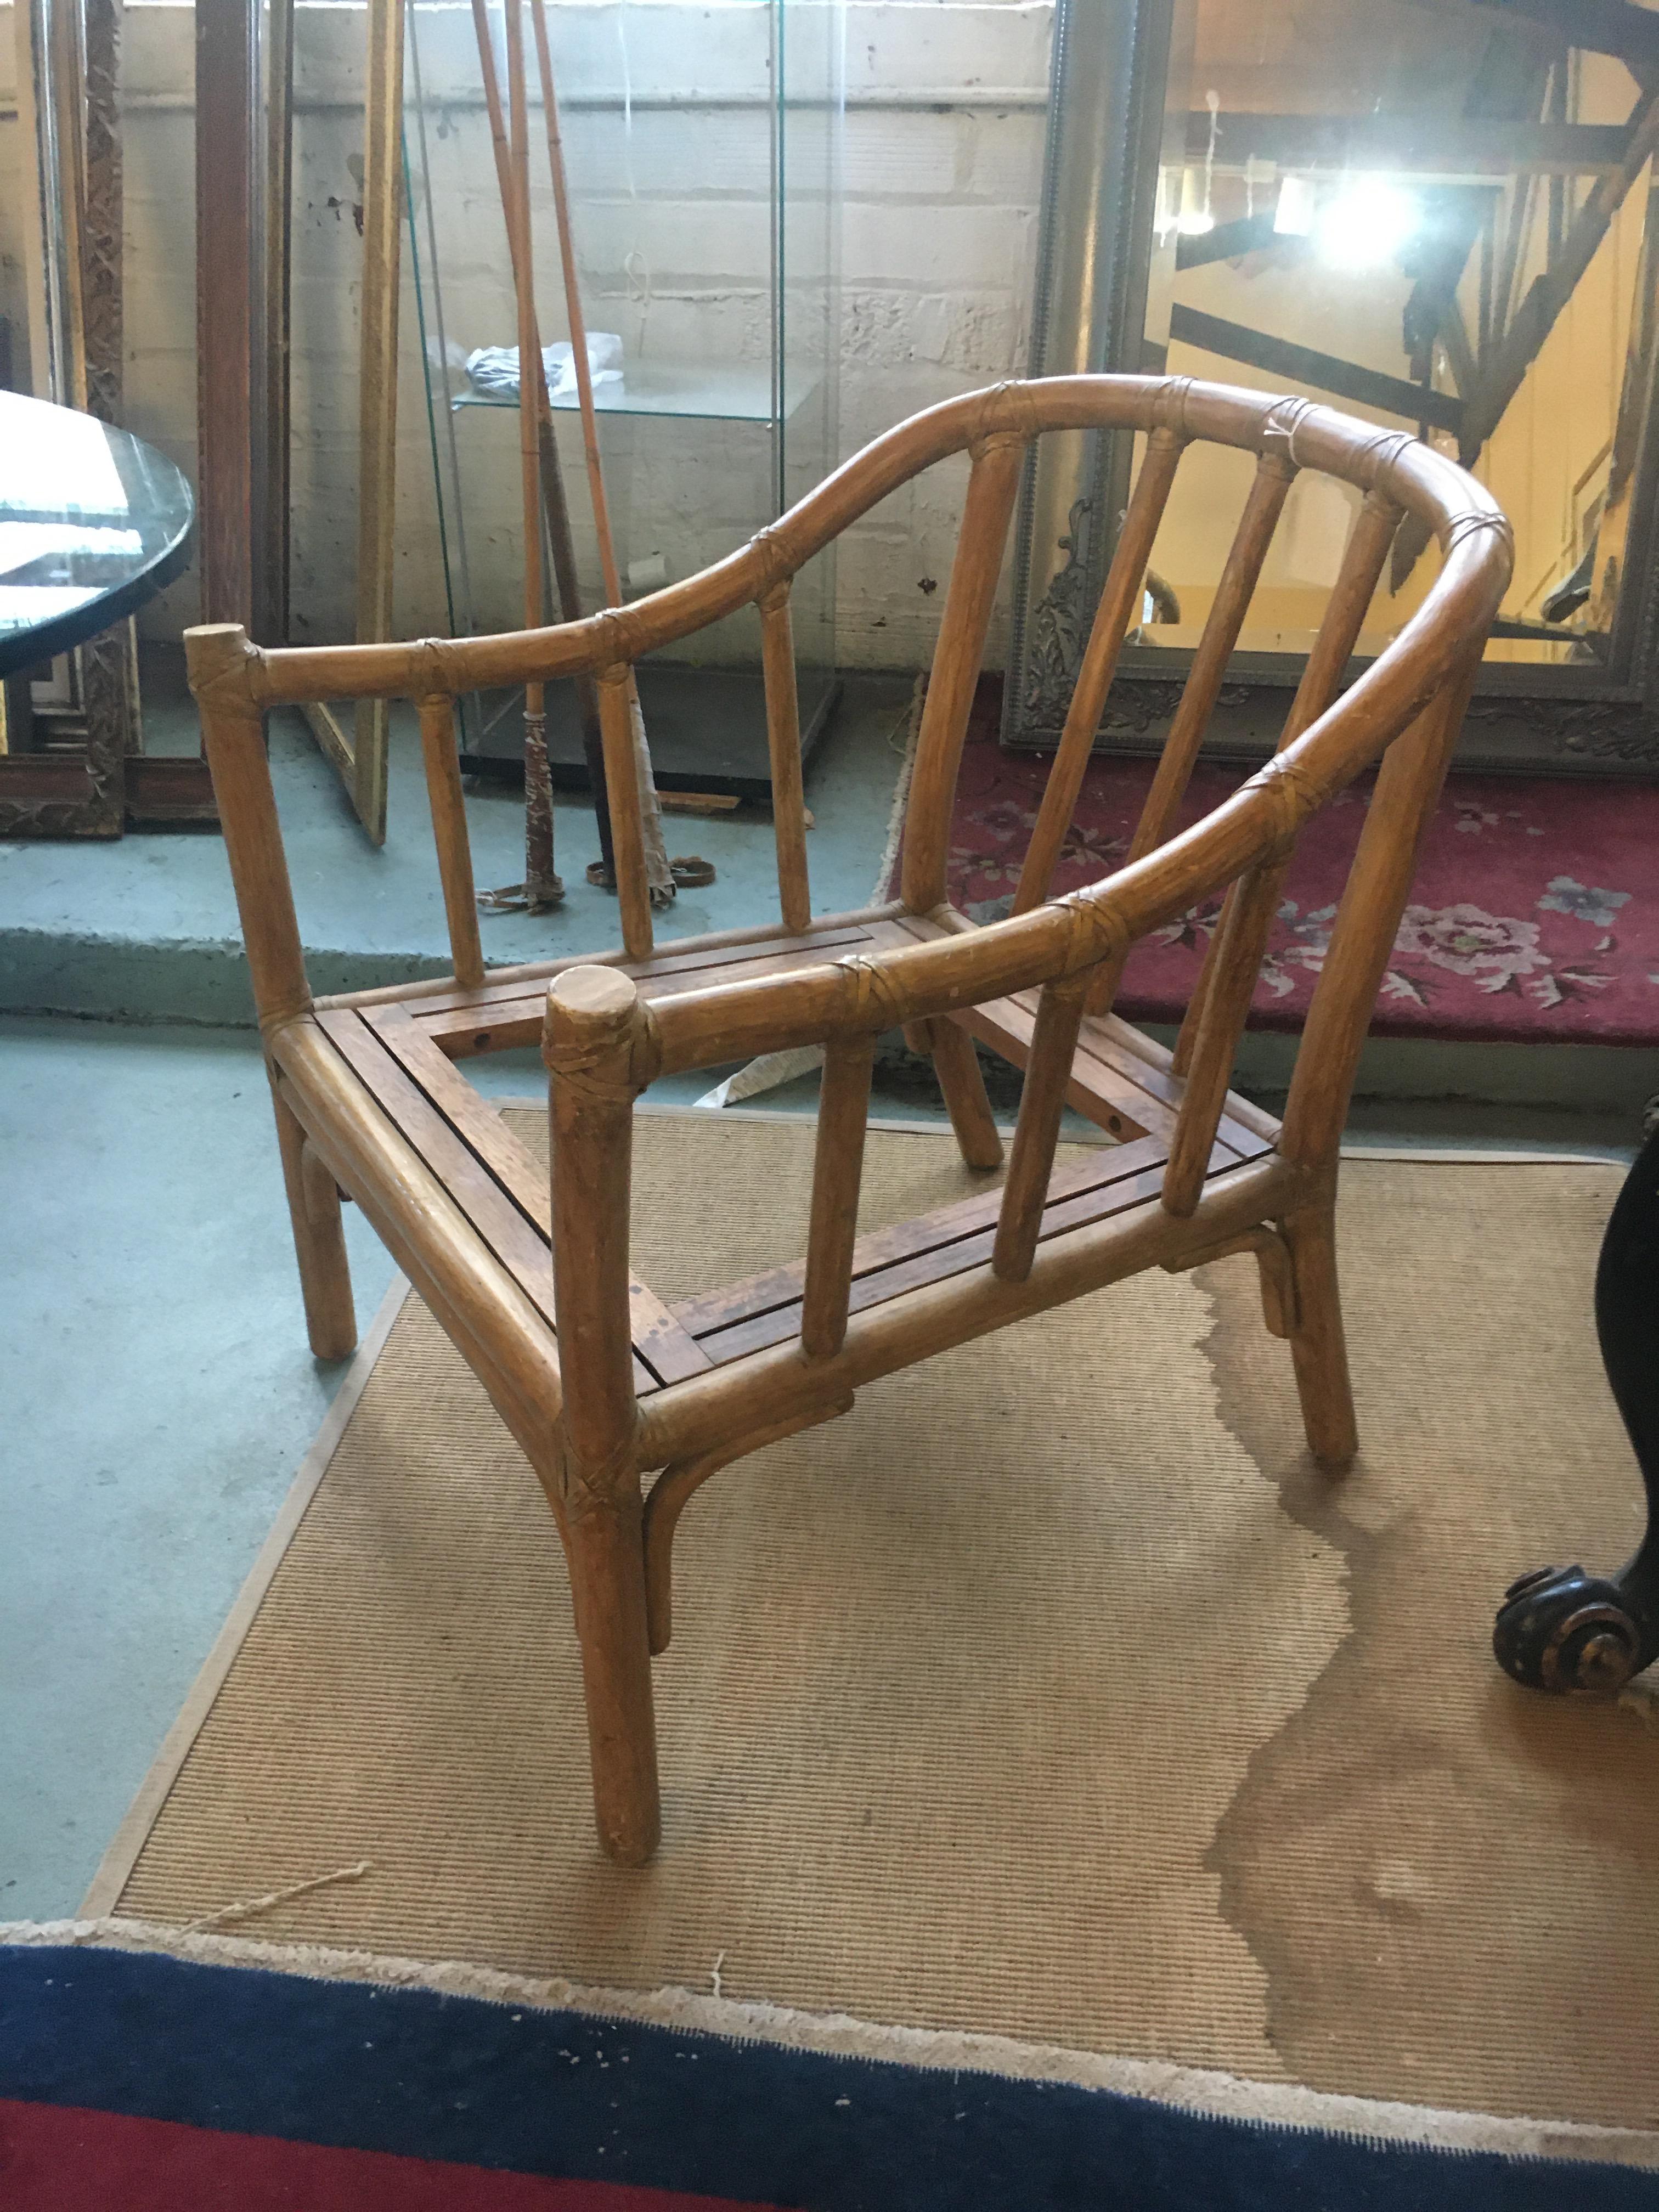 Classic set of four Mcguire club chairs. Great scale for comfort. All chairs share the iconic McGuire leather strap wrappings. All of the chairs are in very good to excellent condition and are signed with the McGuire tag. We only have two left with